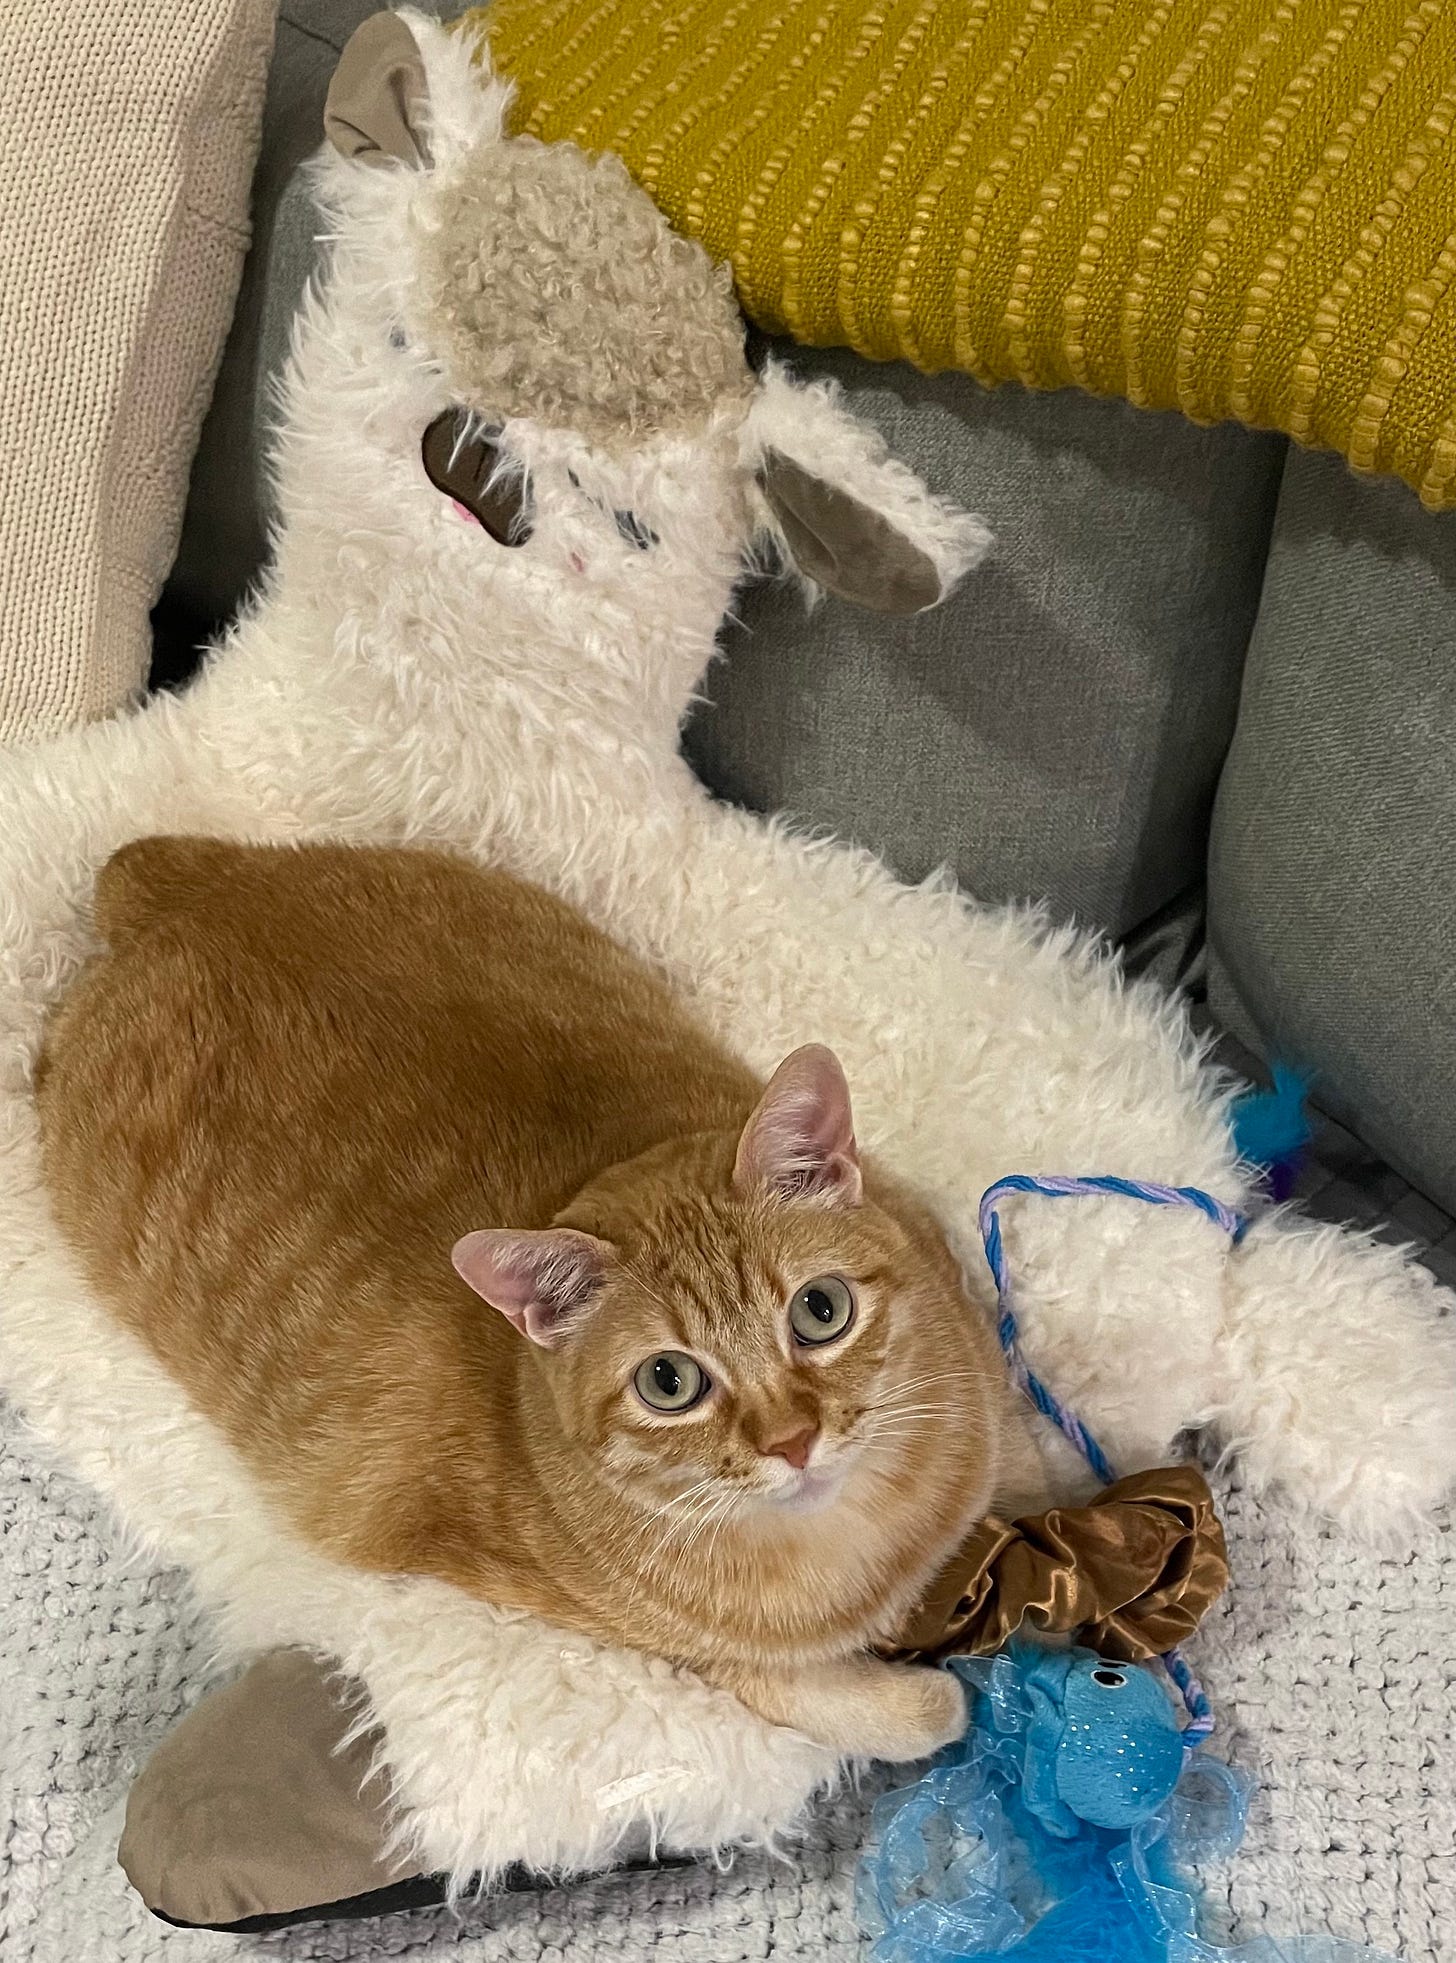 My orange tabby cat rests on a cushion shaped like an alpaca. He looks snuggly and super comfortable. 